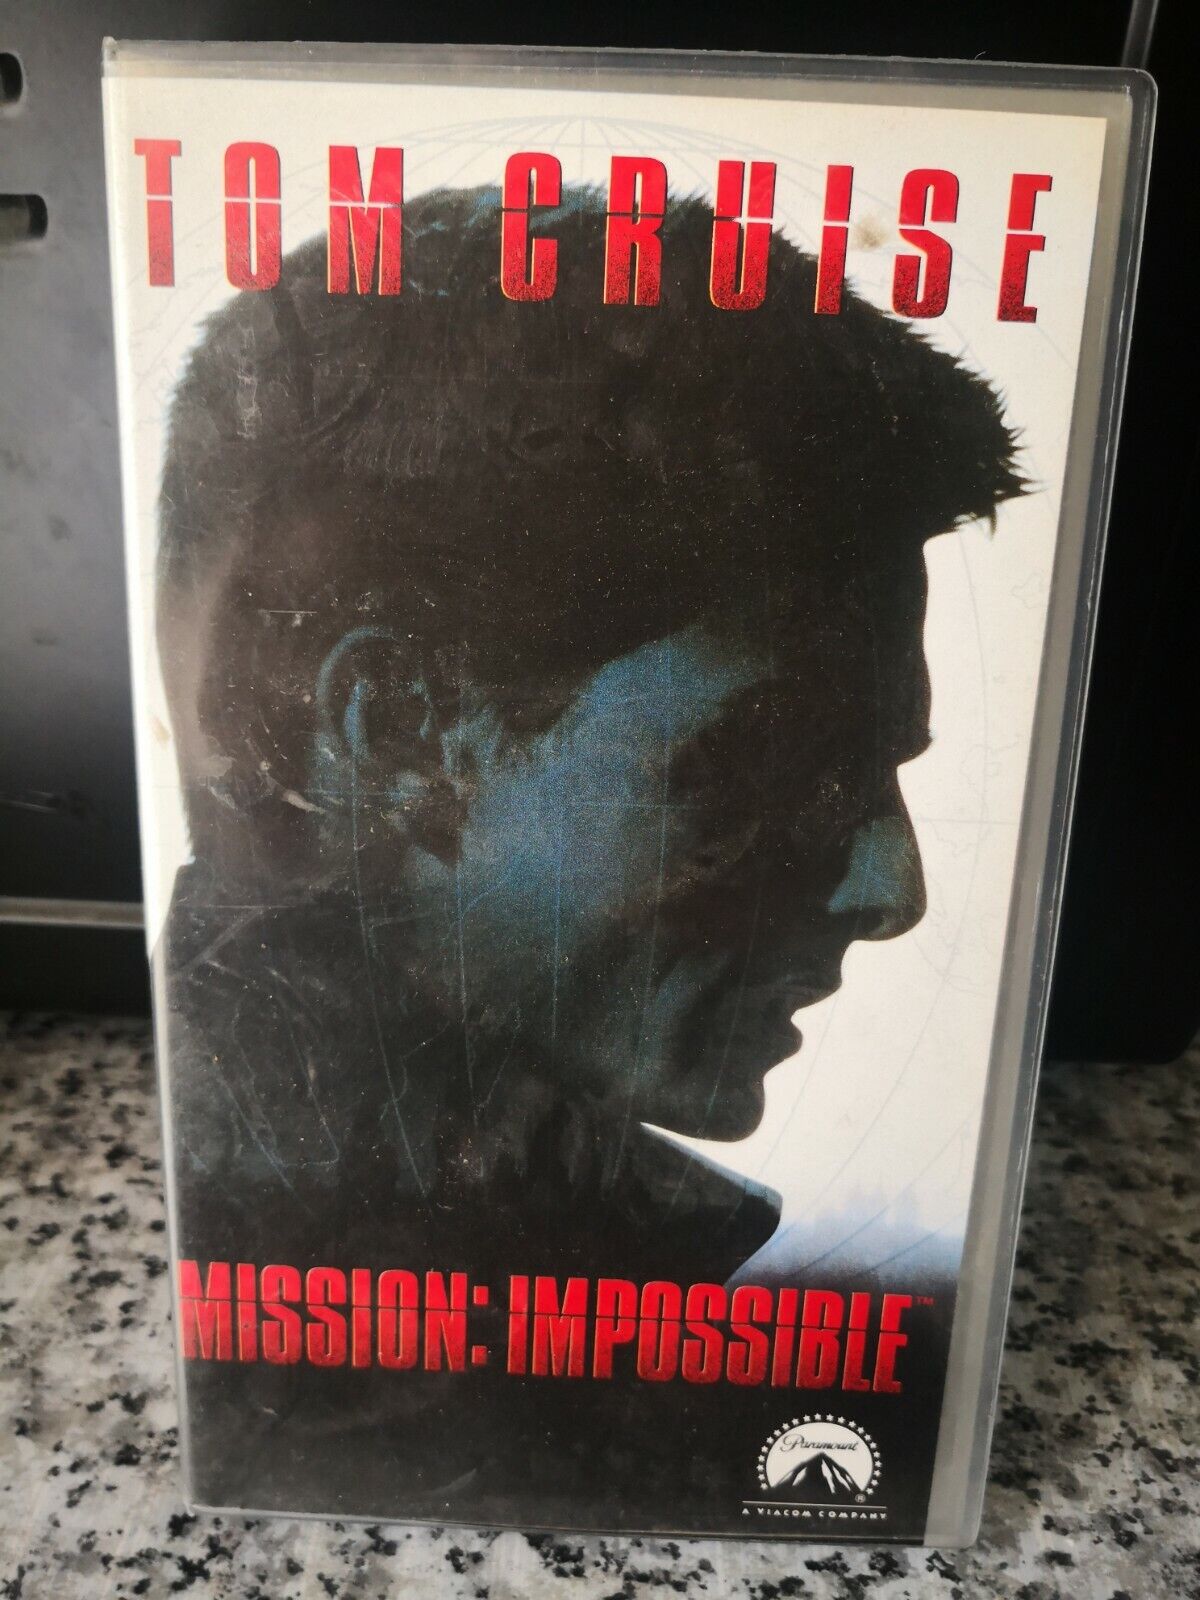 Tom Cruise - Mission impossible - vhs - 2000 - Univideo -F vhs usato